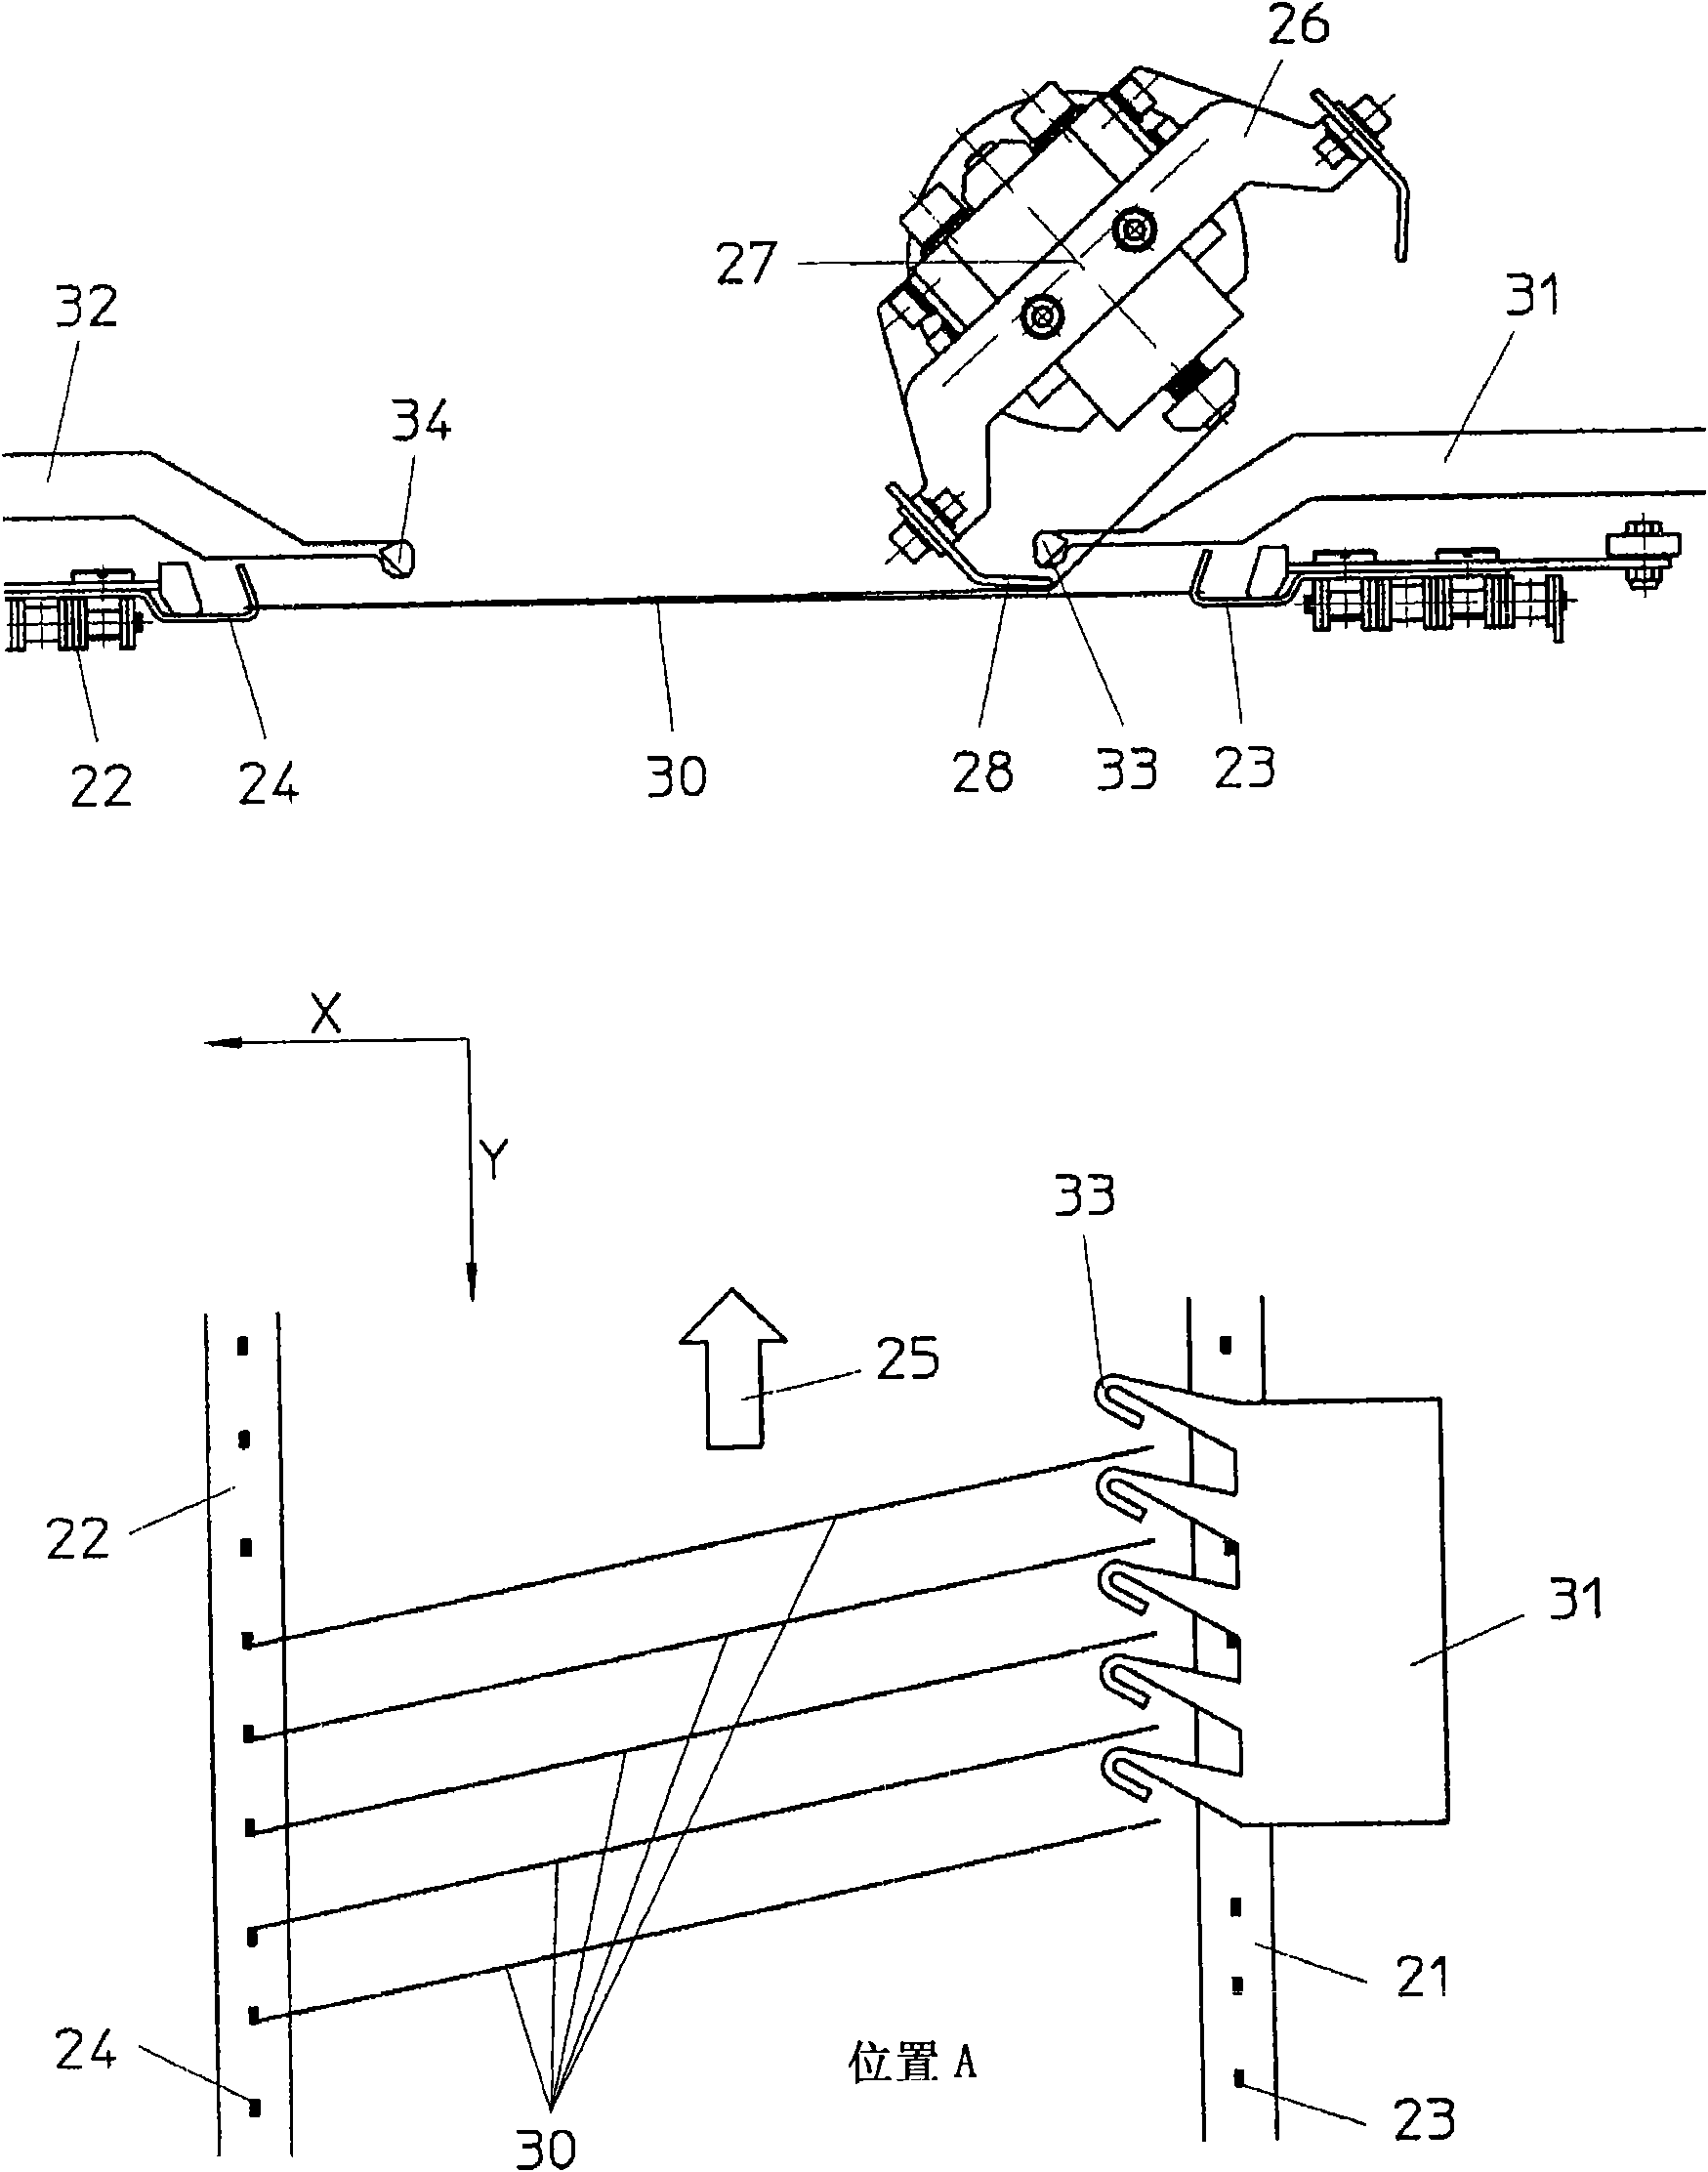 Method and device for placing a unidirectional thread layer on longitudinal conveyors, method for laying weft threads on warp knitting machines, and device to carry out said methods